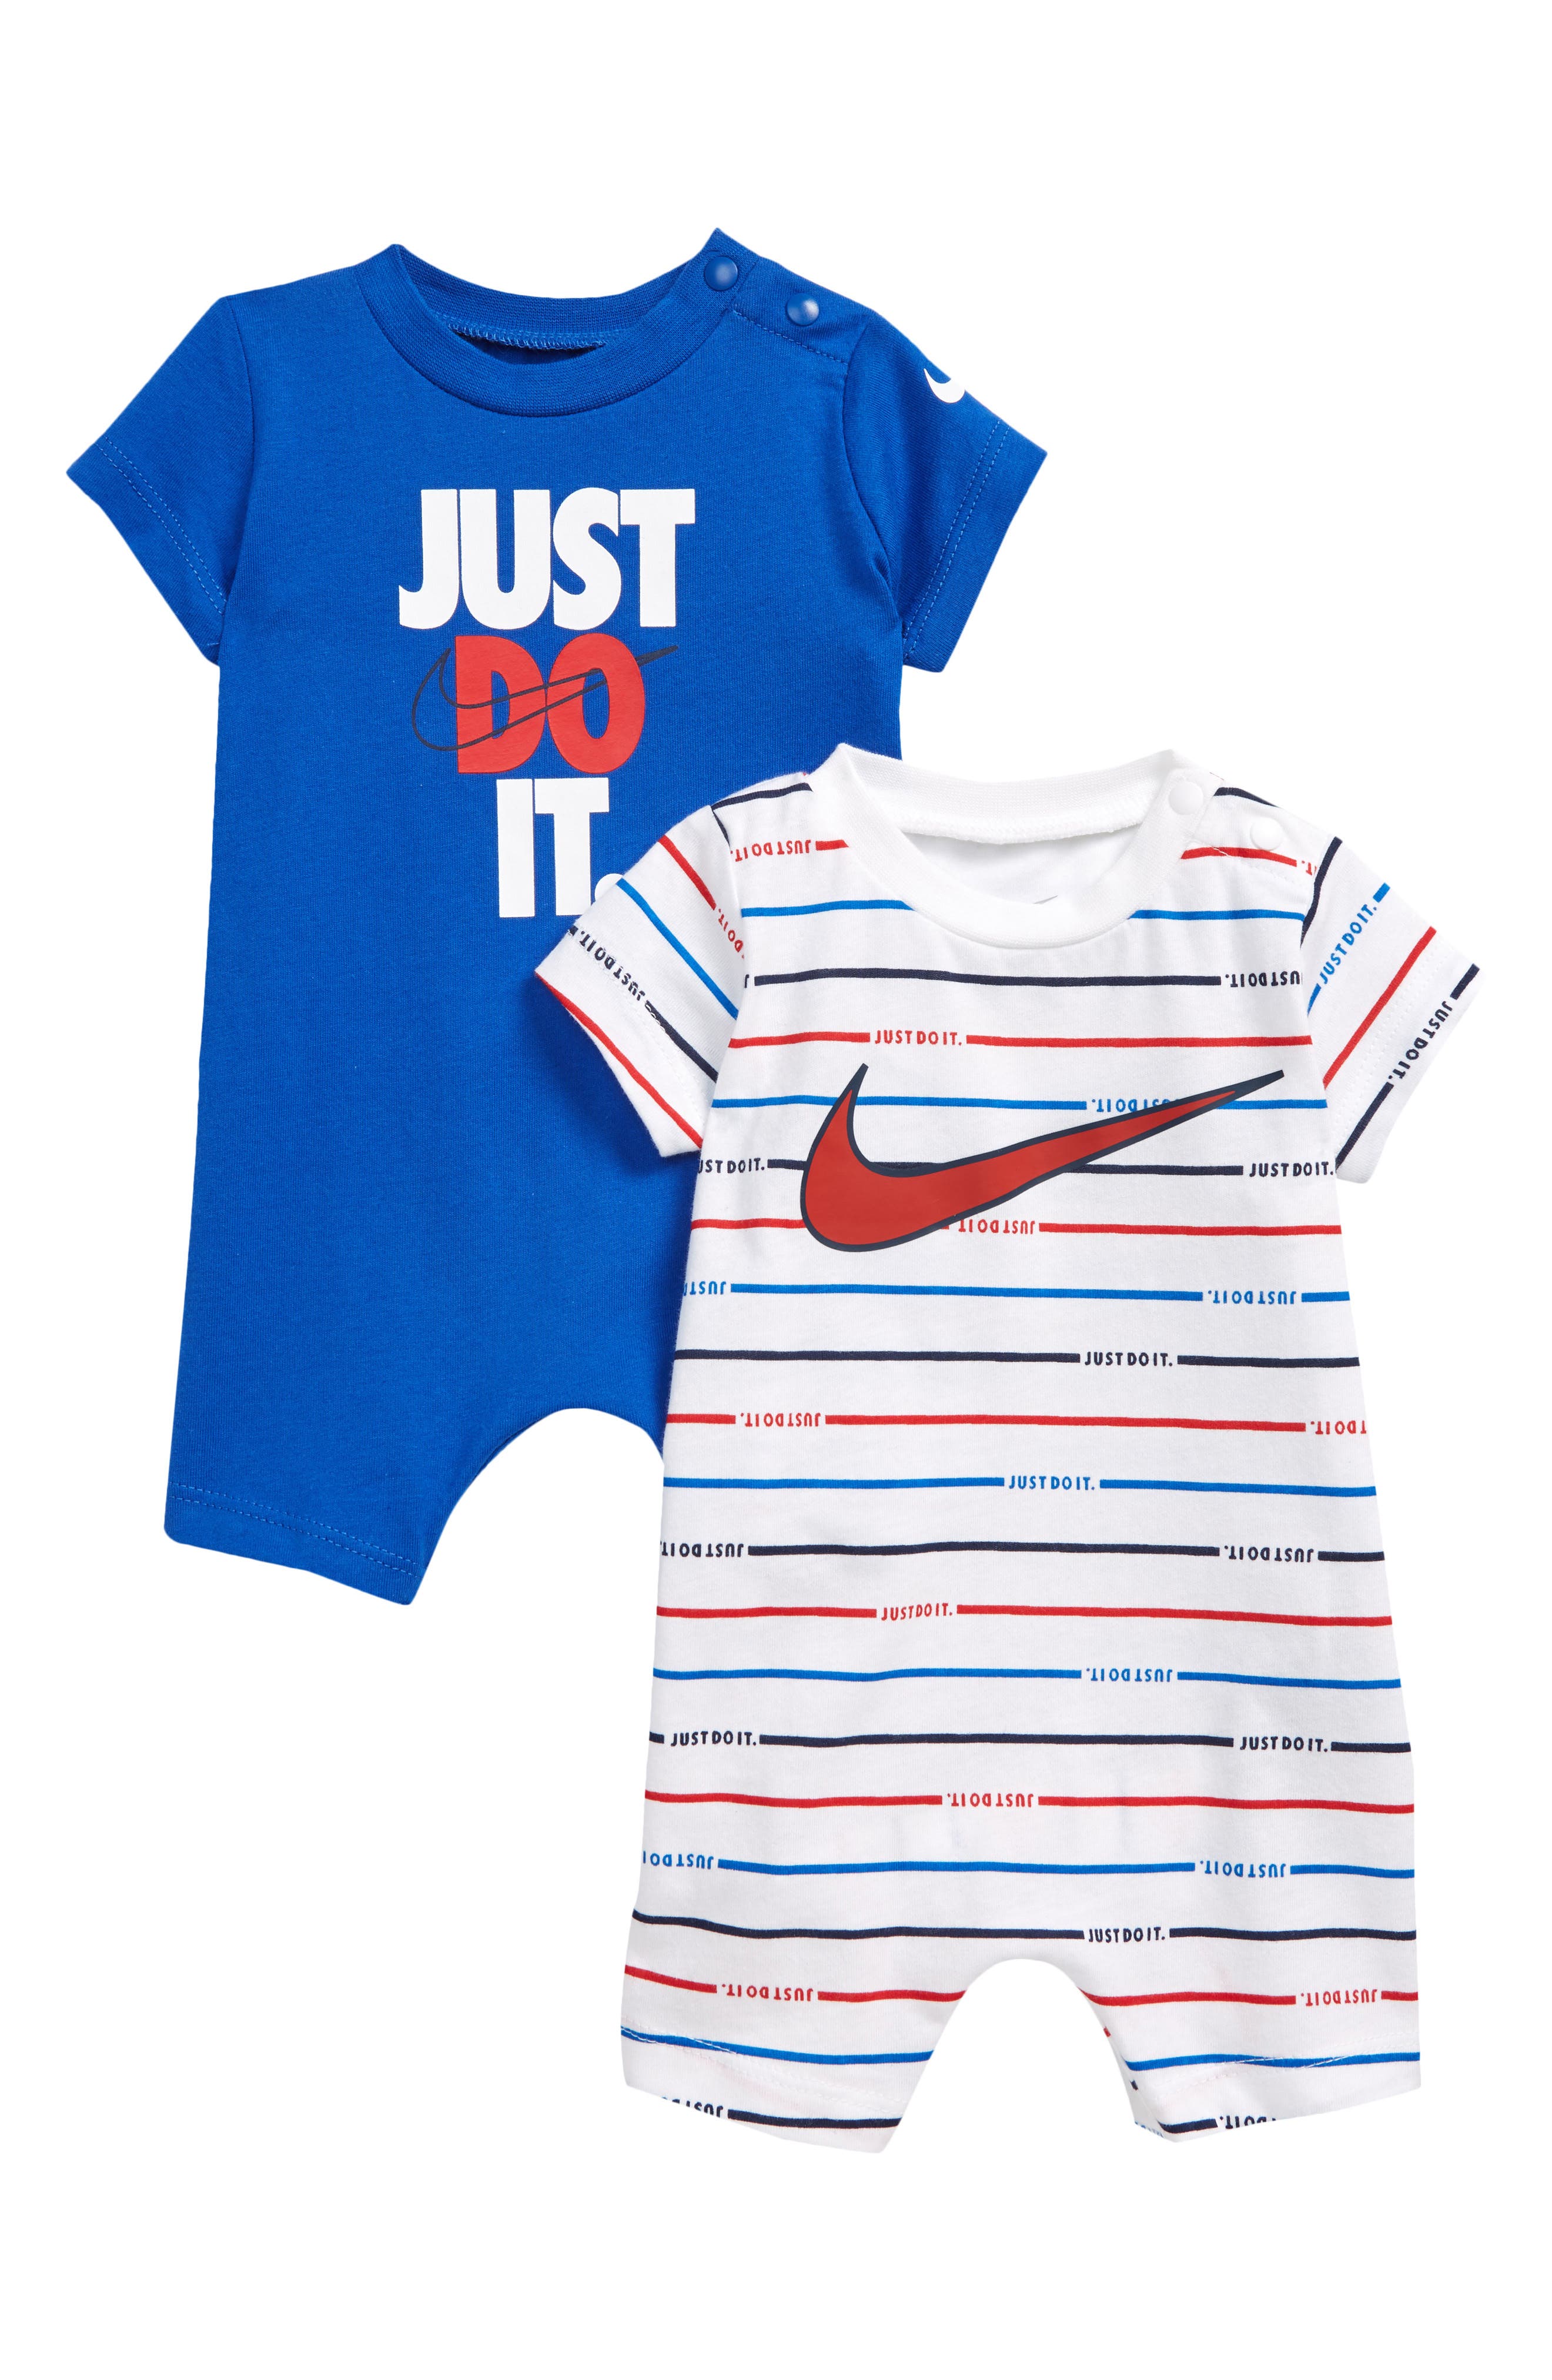 nike baby clothes